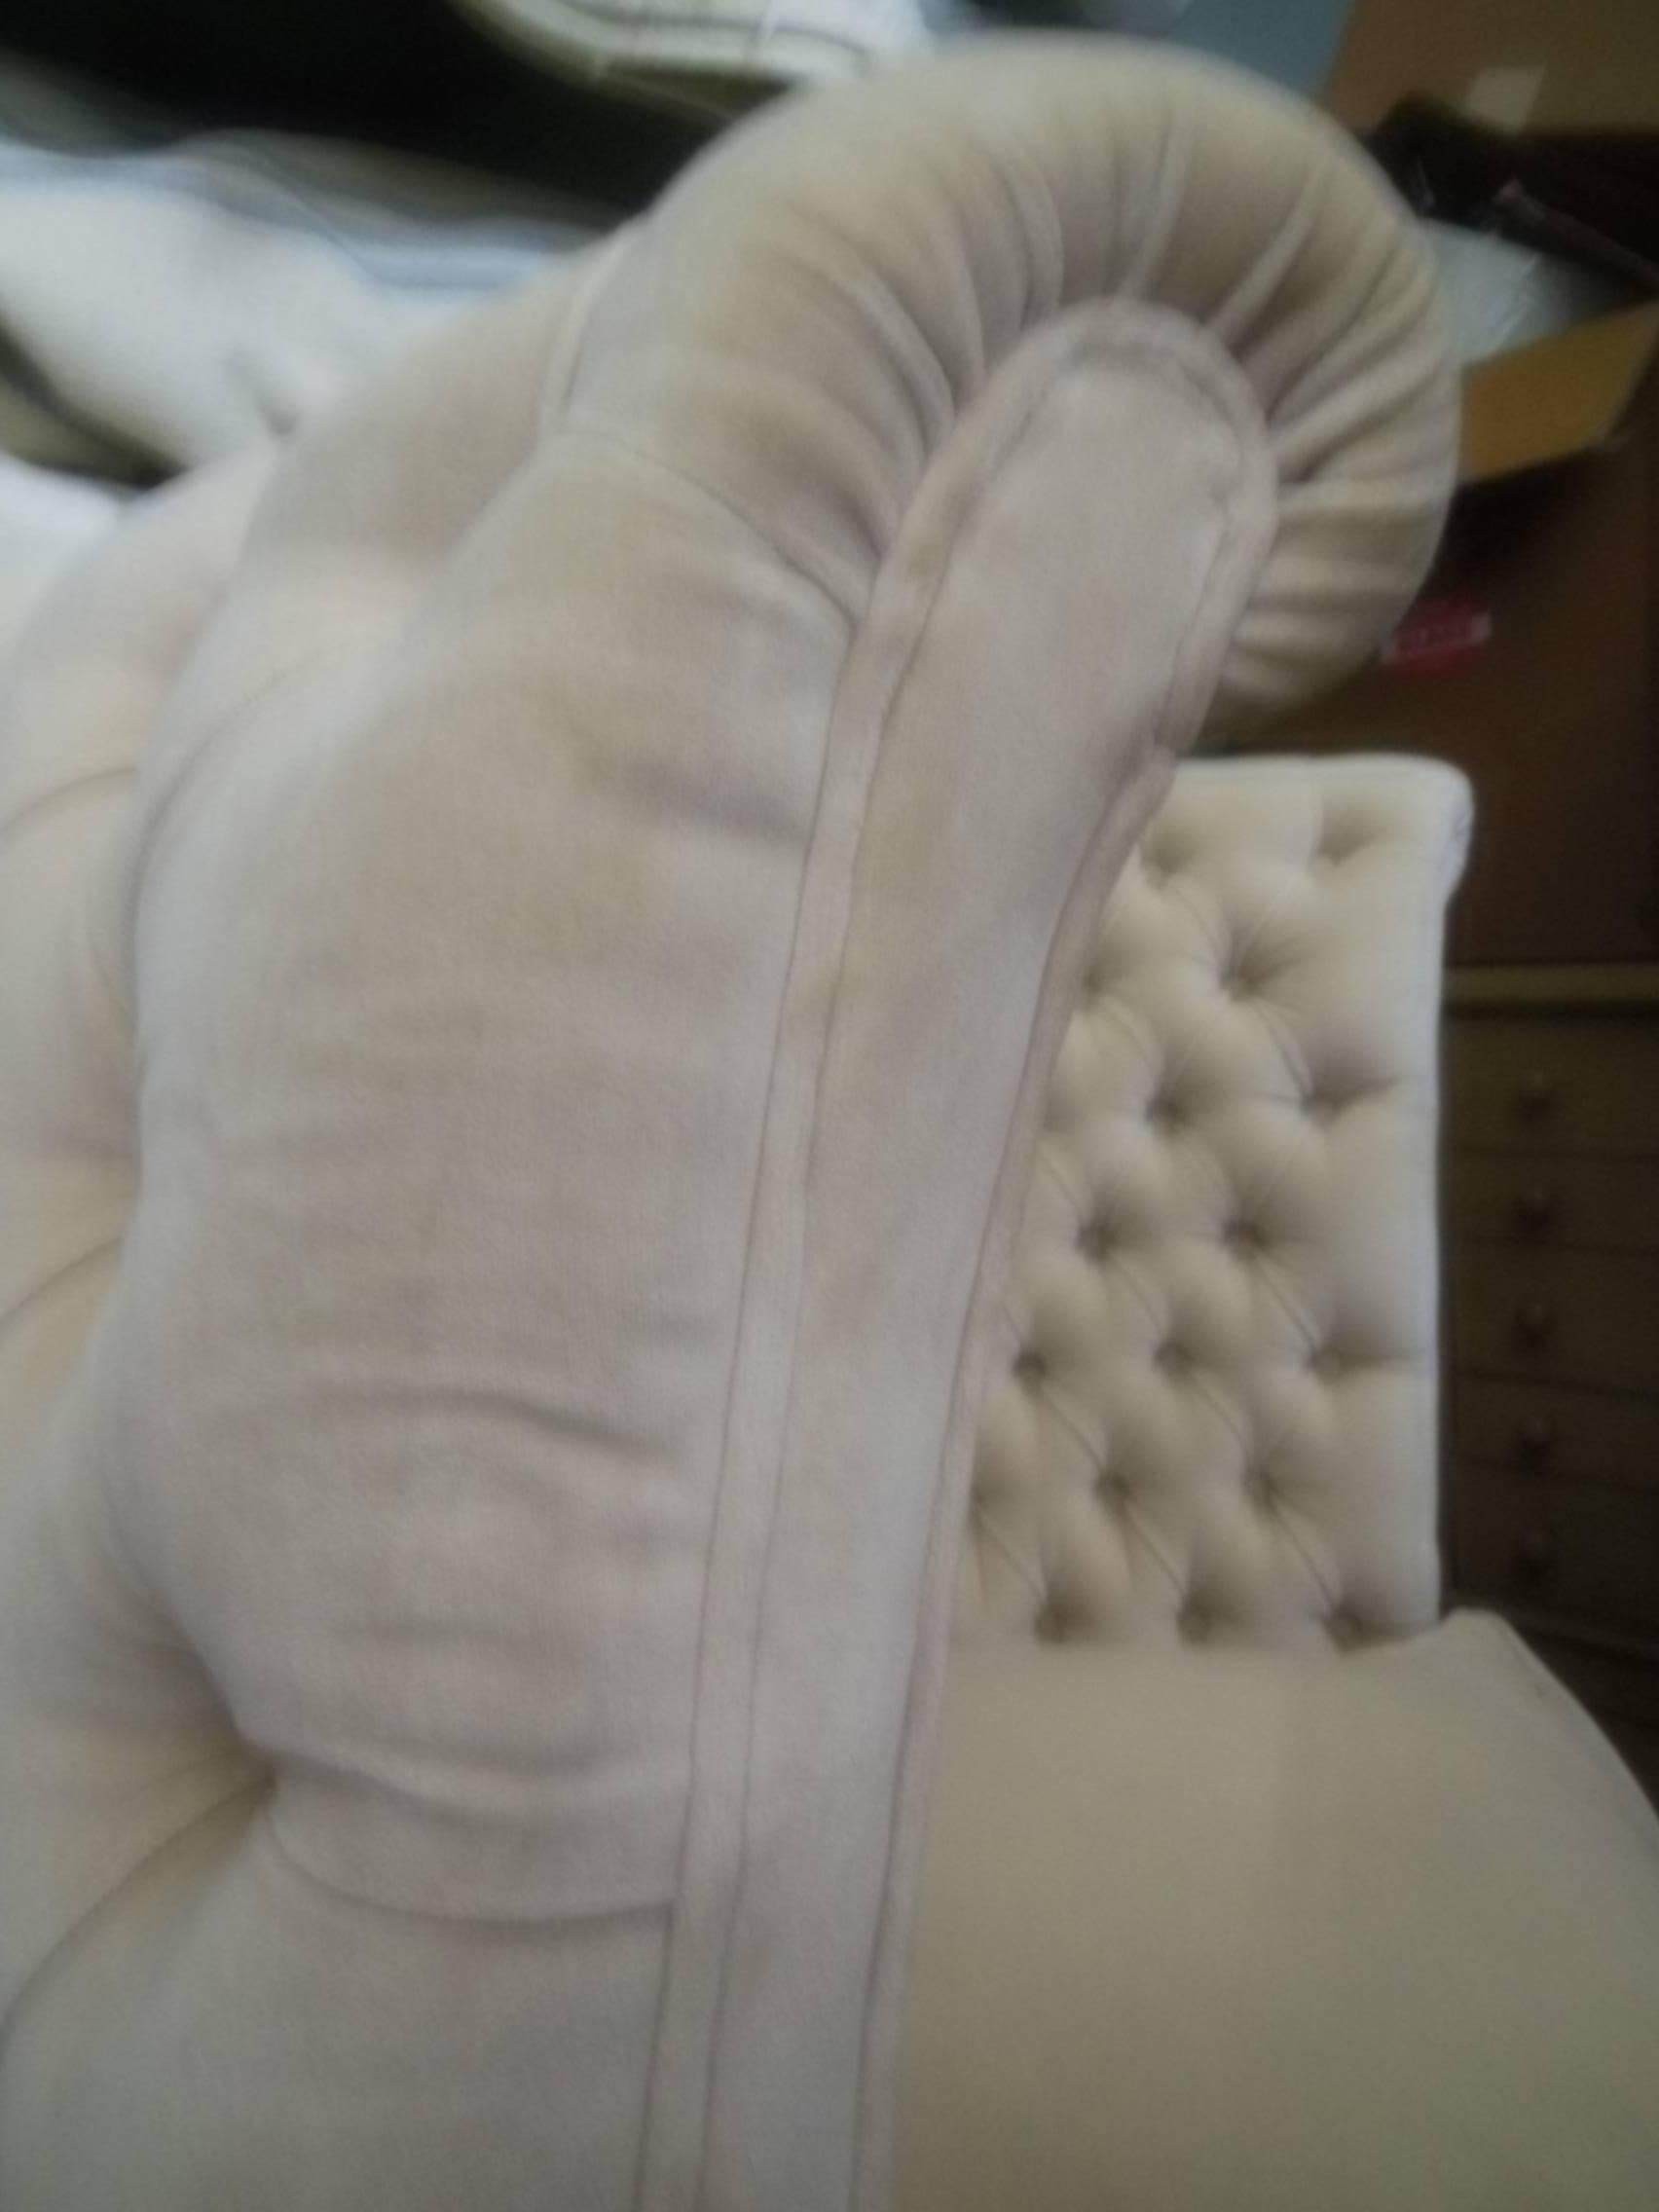 Pair of High Style Vintage Tufted Slipper Chairs In Excellent Condition For Sale In Sag Harbor, NY